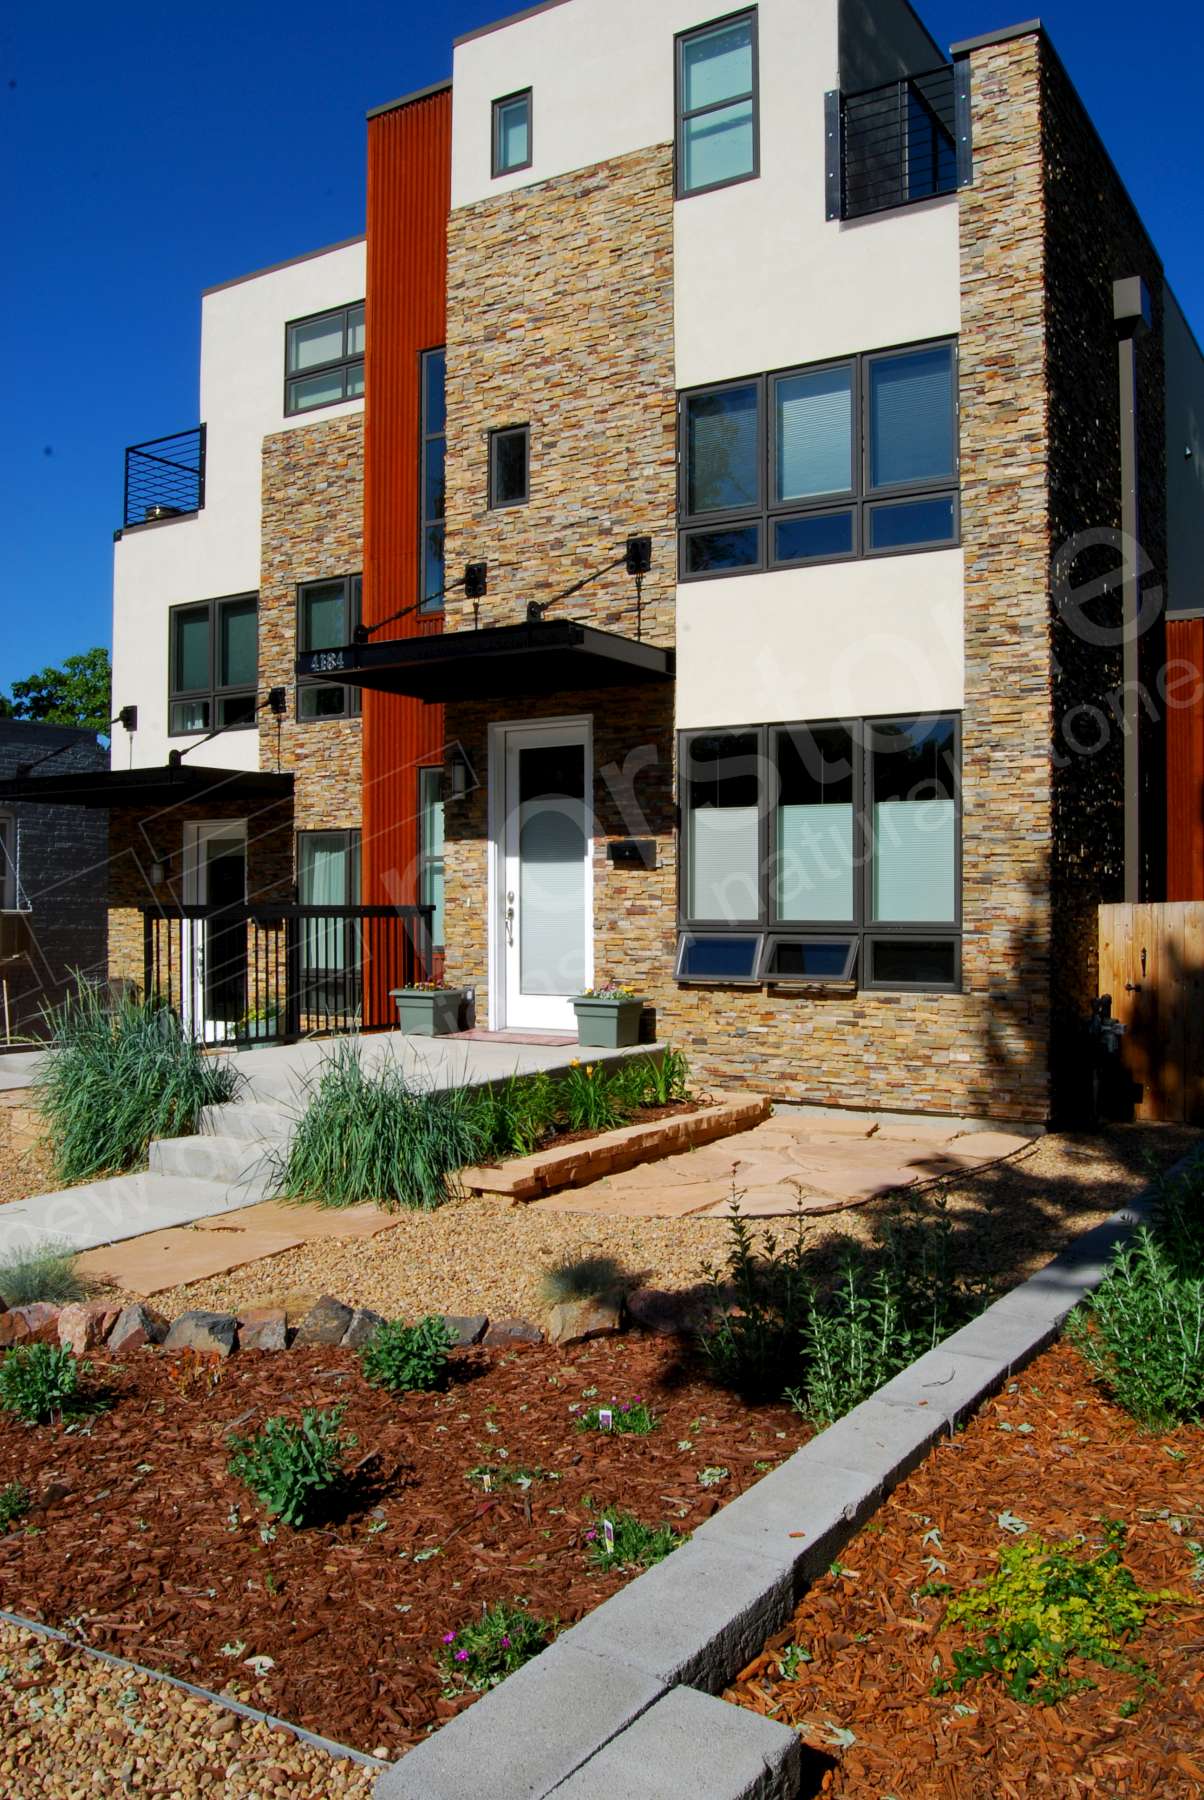 Norstone Ochre Stacked Stone Rock Panels on entryway and front facade of duplex in Colorado